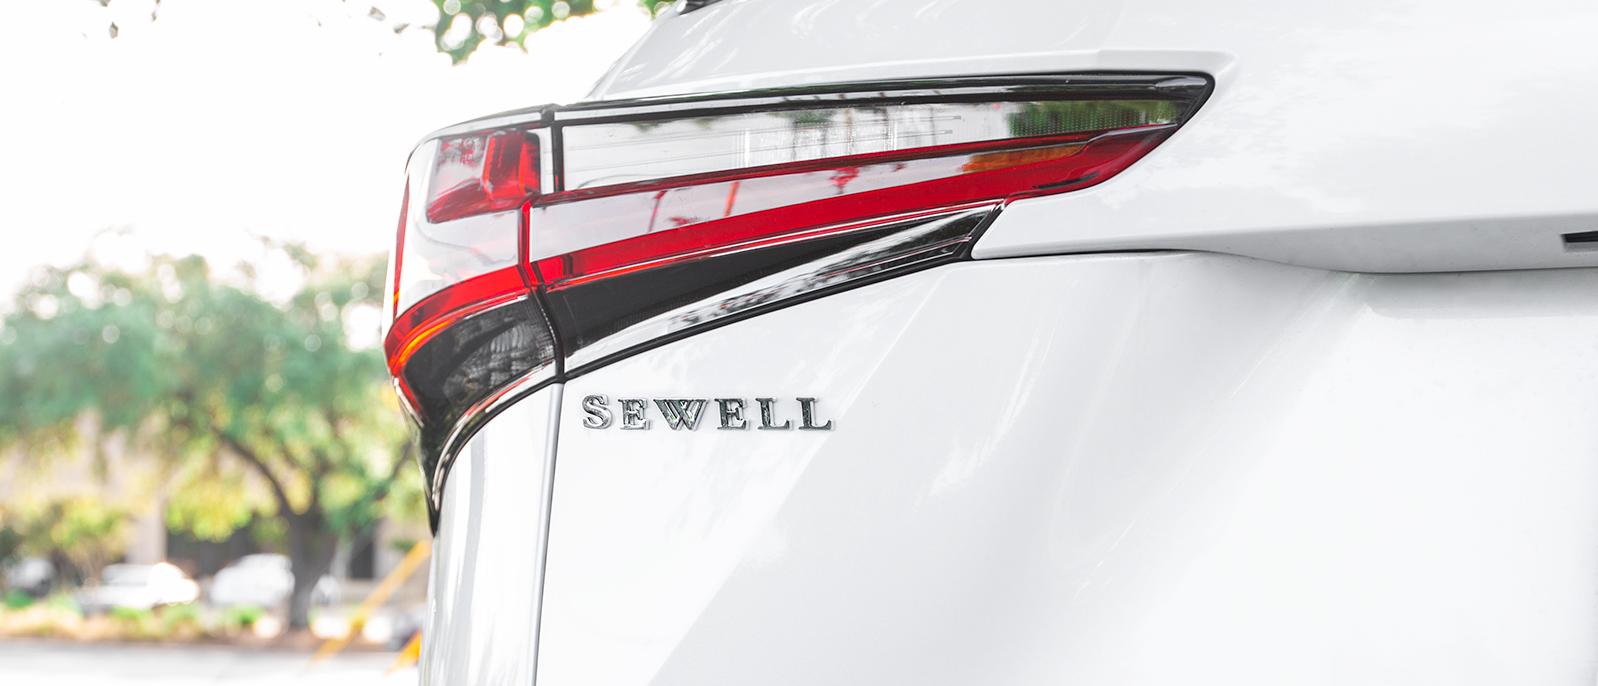 sewell-certified-pre-owned-program-benefits-sewell-automotive-companies